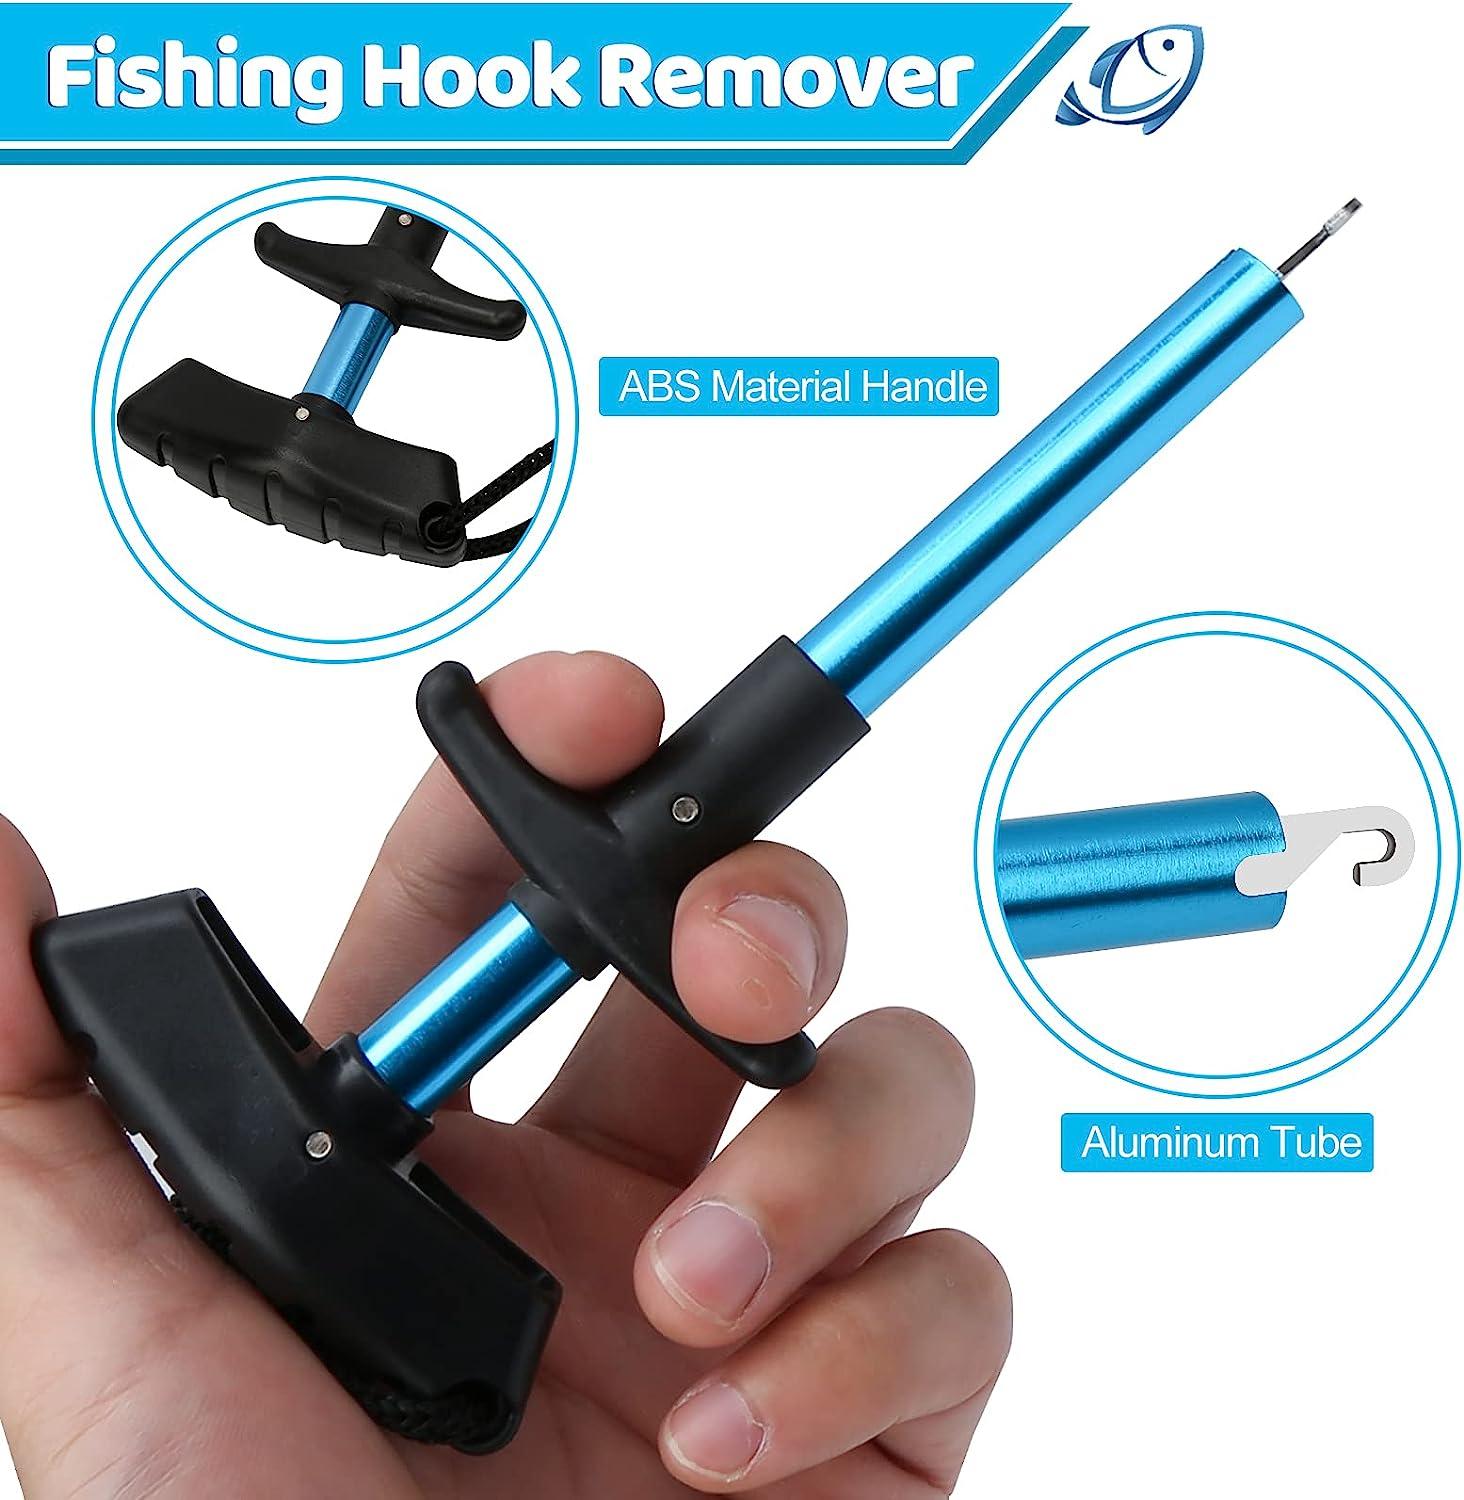 Aukivon Fishing Tools Kit, Finshing Gear Include Fishing Pliers, Aluminum  Fish Lip Gripper, Multifunctional Fishing Pliers Hook Remover Split Ring,Fishing  Gifts for Men,Angler Friends or Family